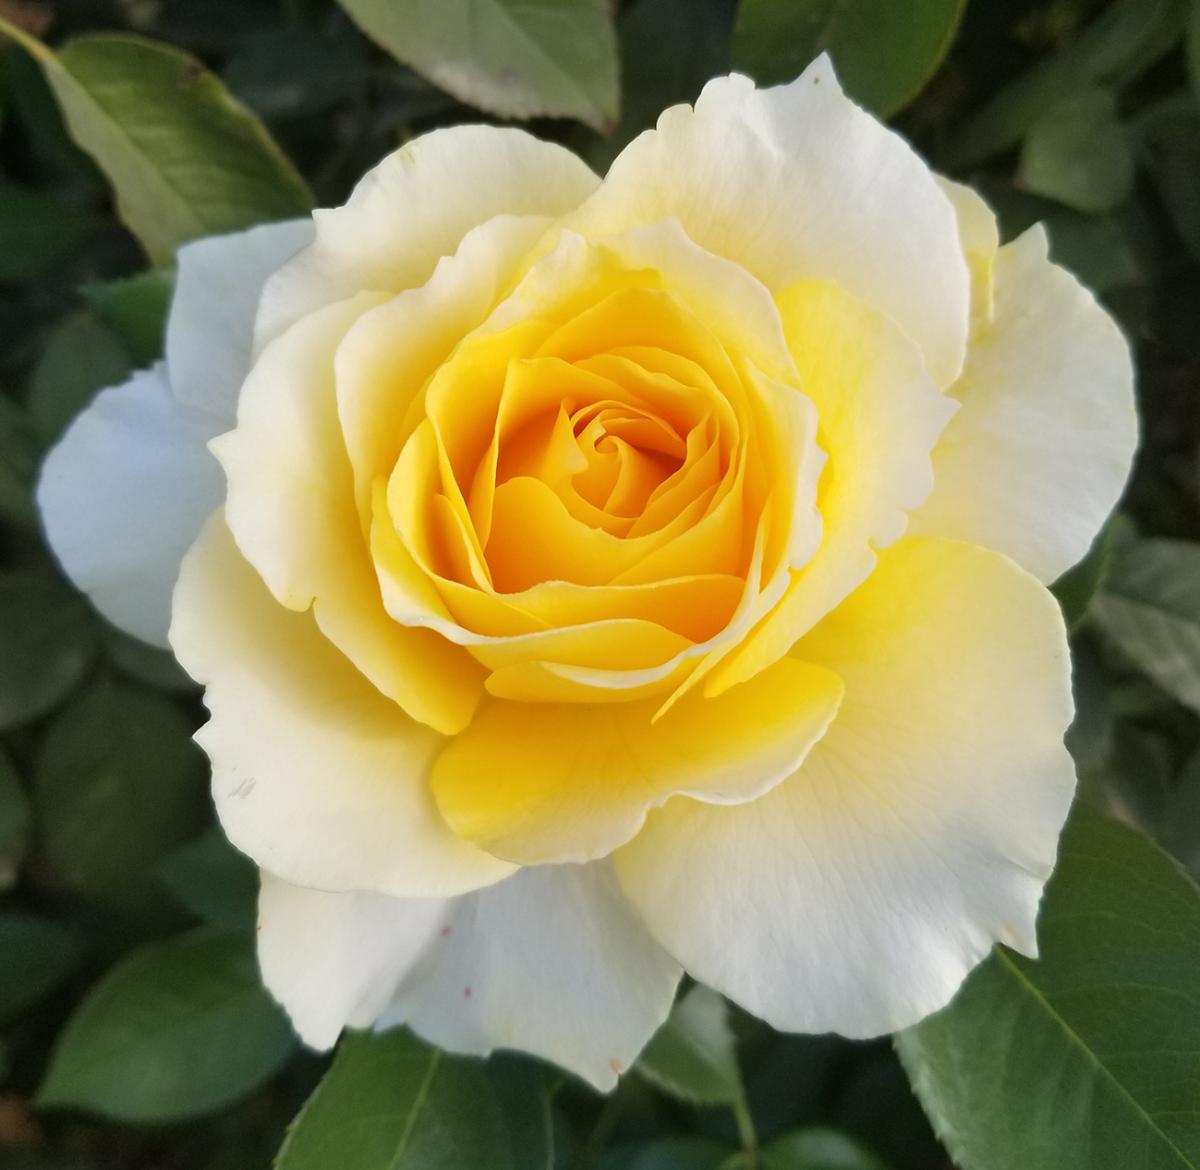 Quest for Zest yellow rose